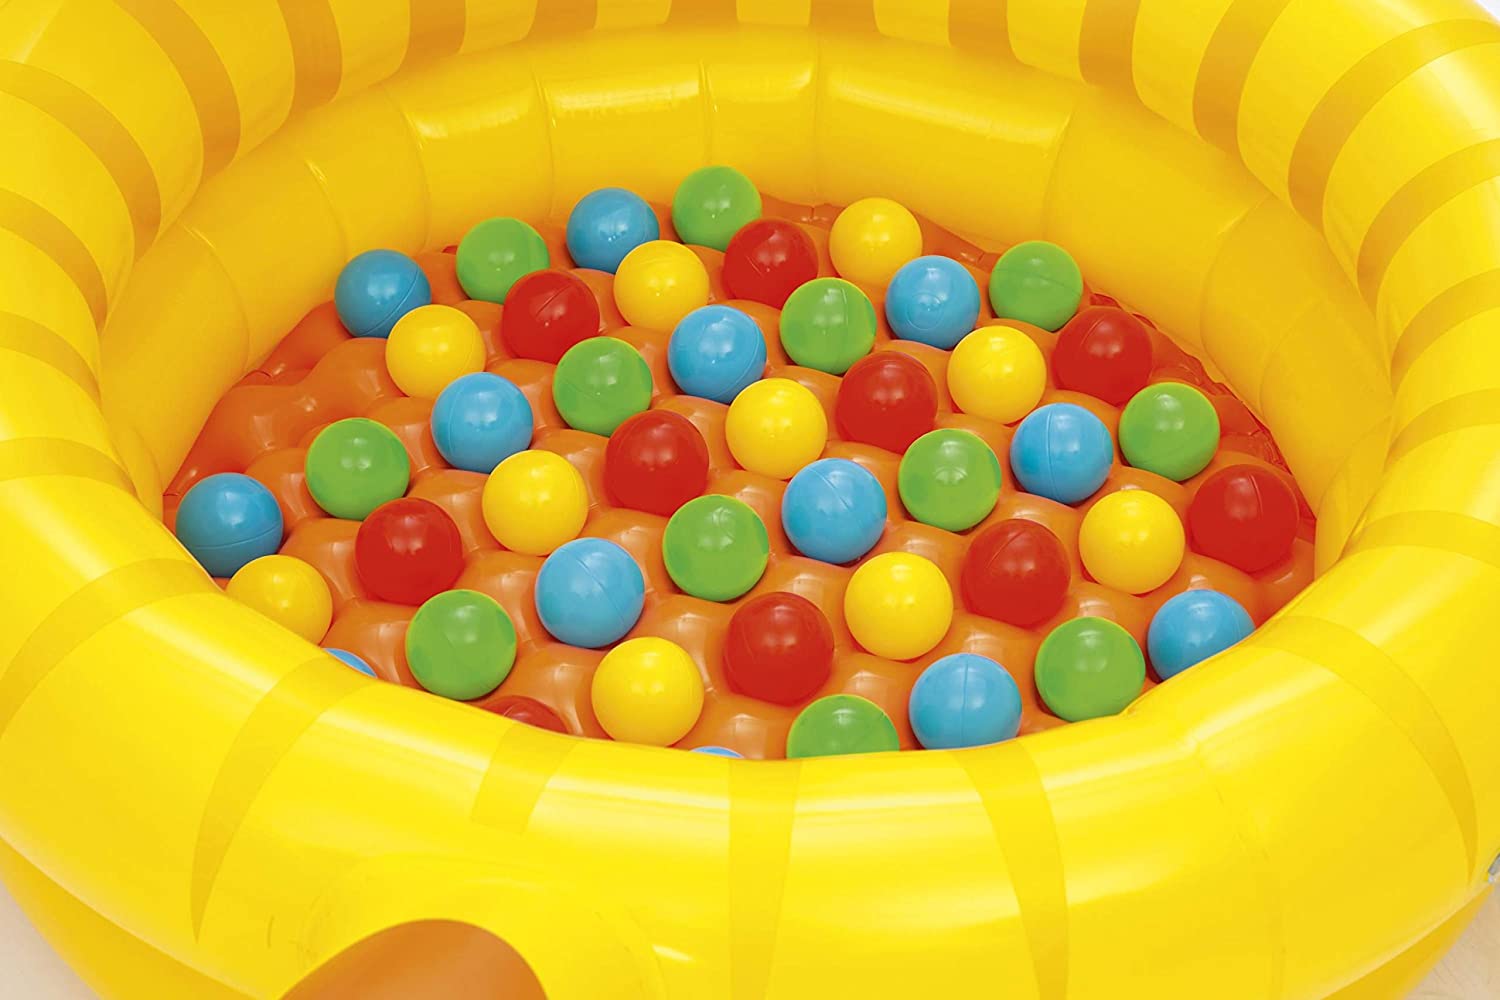 Up, In & Over Lion Ball Pit (44" x 39" x 24"/1.11m x 98cm x 61.5cm)